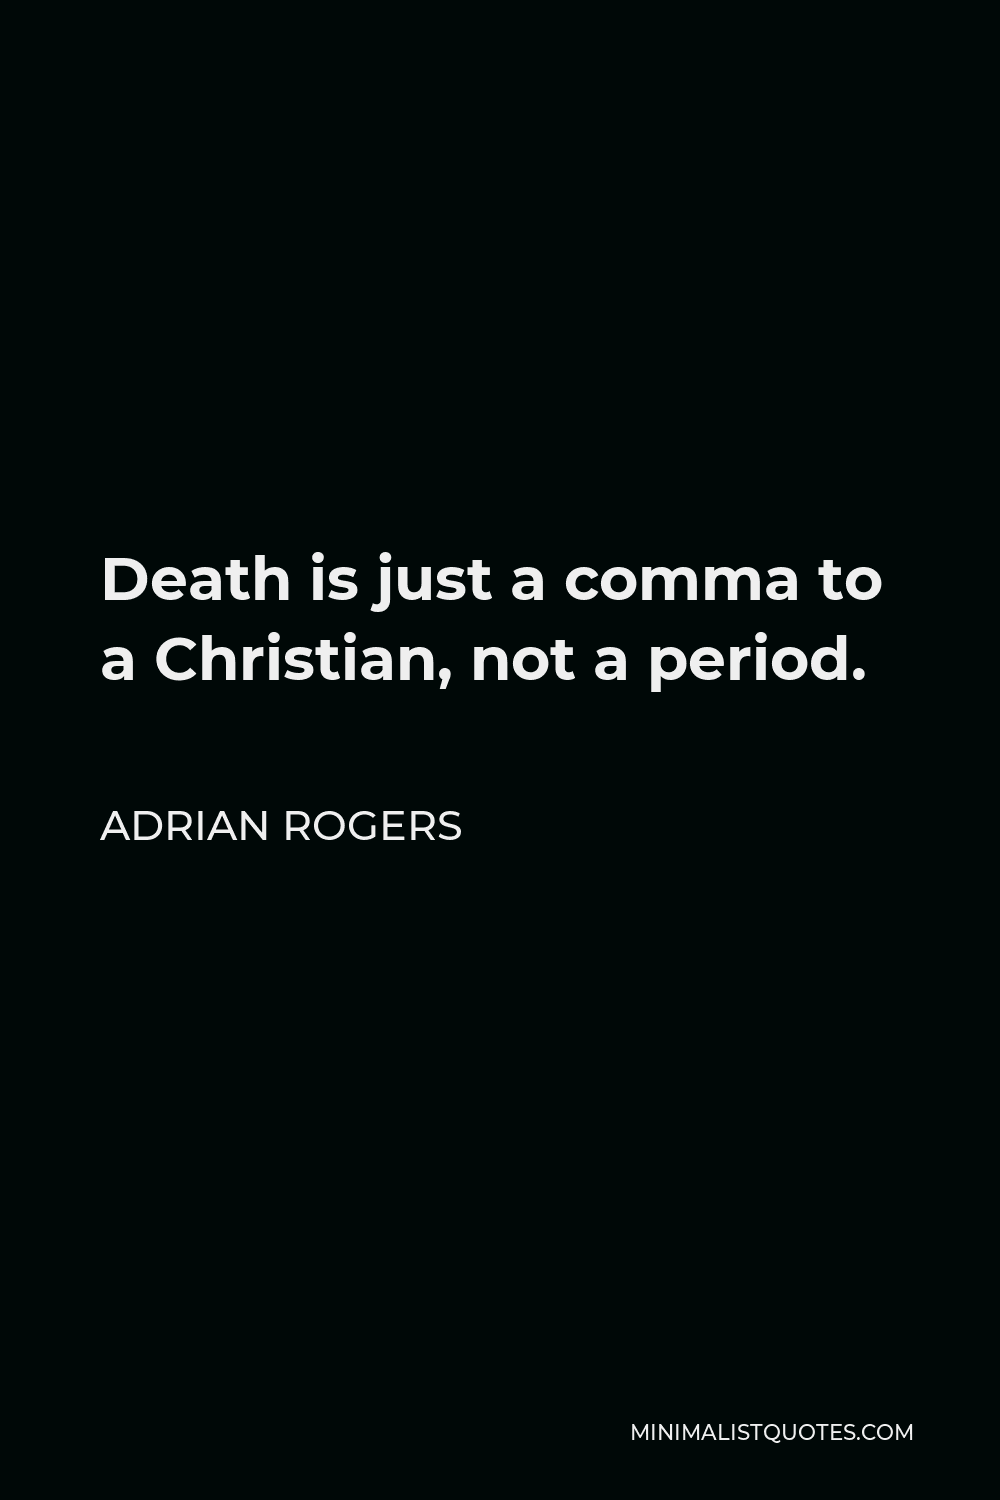 Adrian Rogers Quote - Death is just a comma to a Christian, not a period.